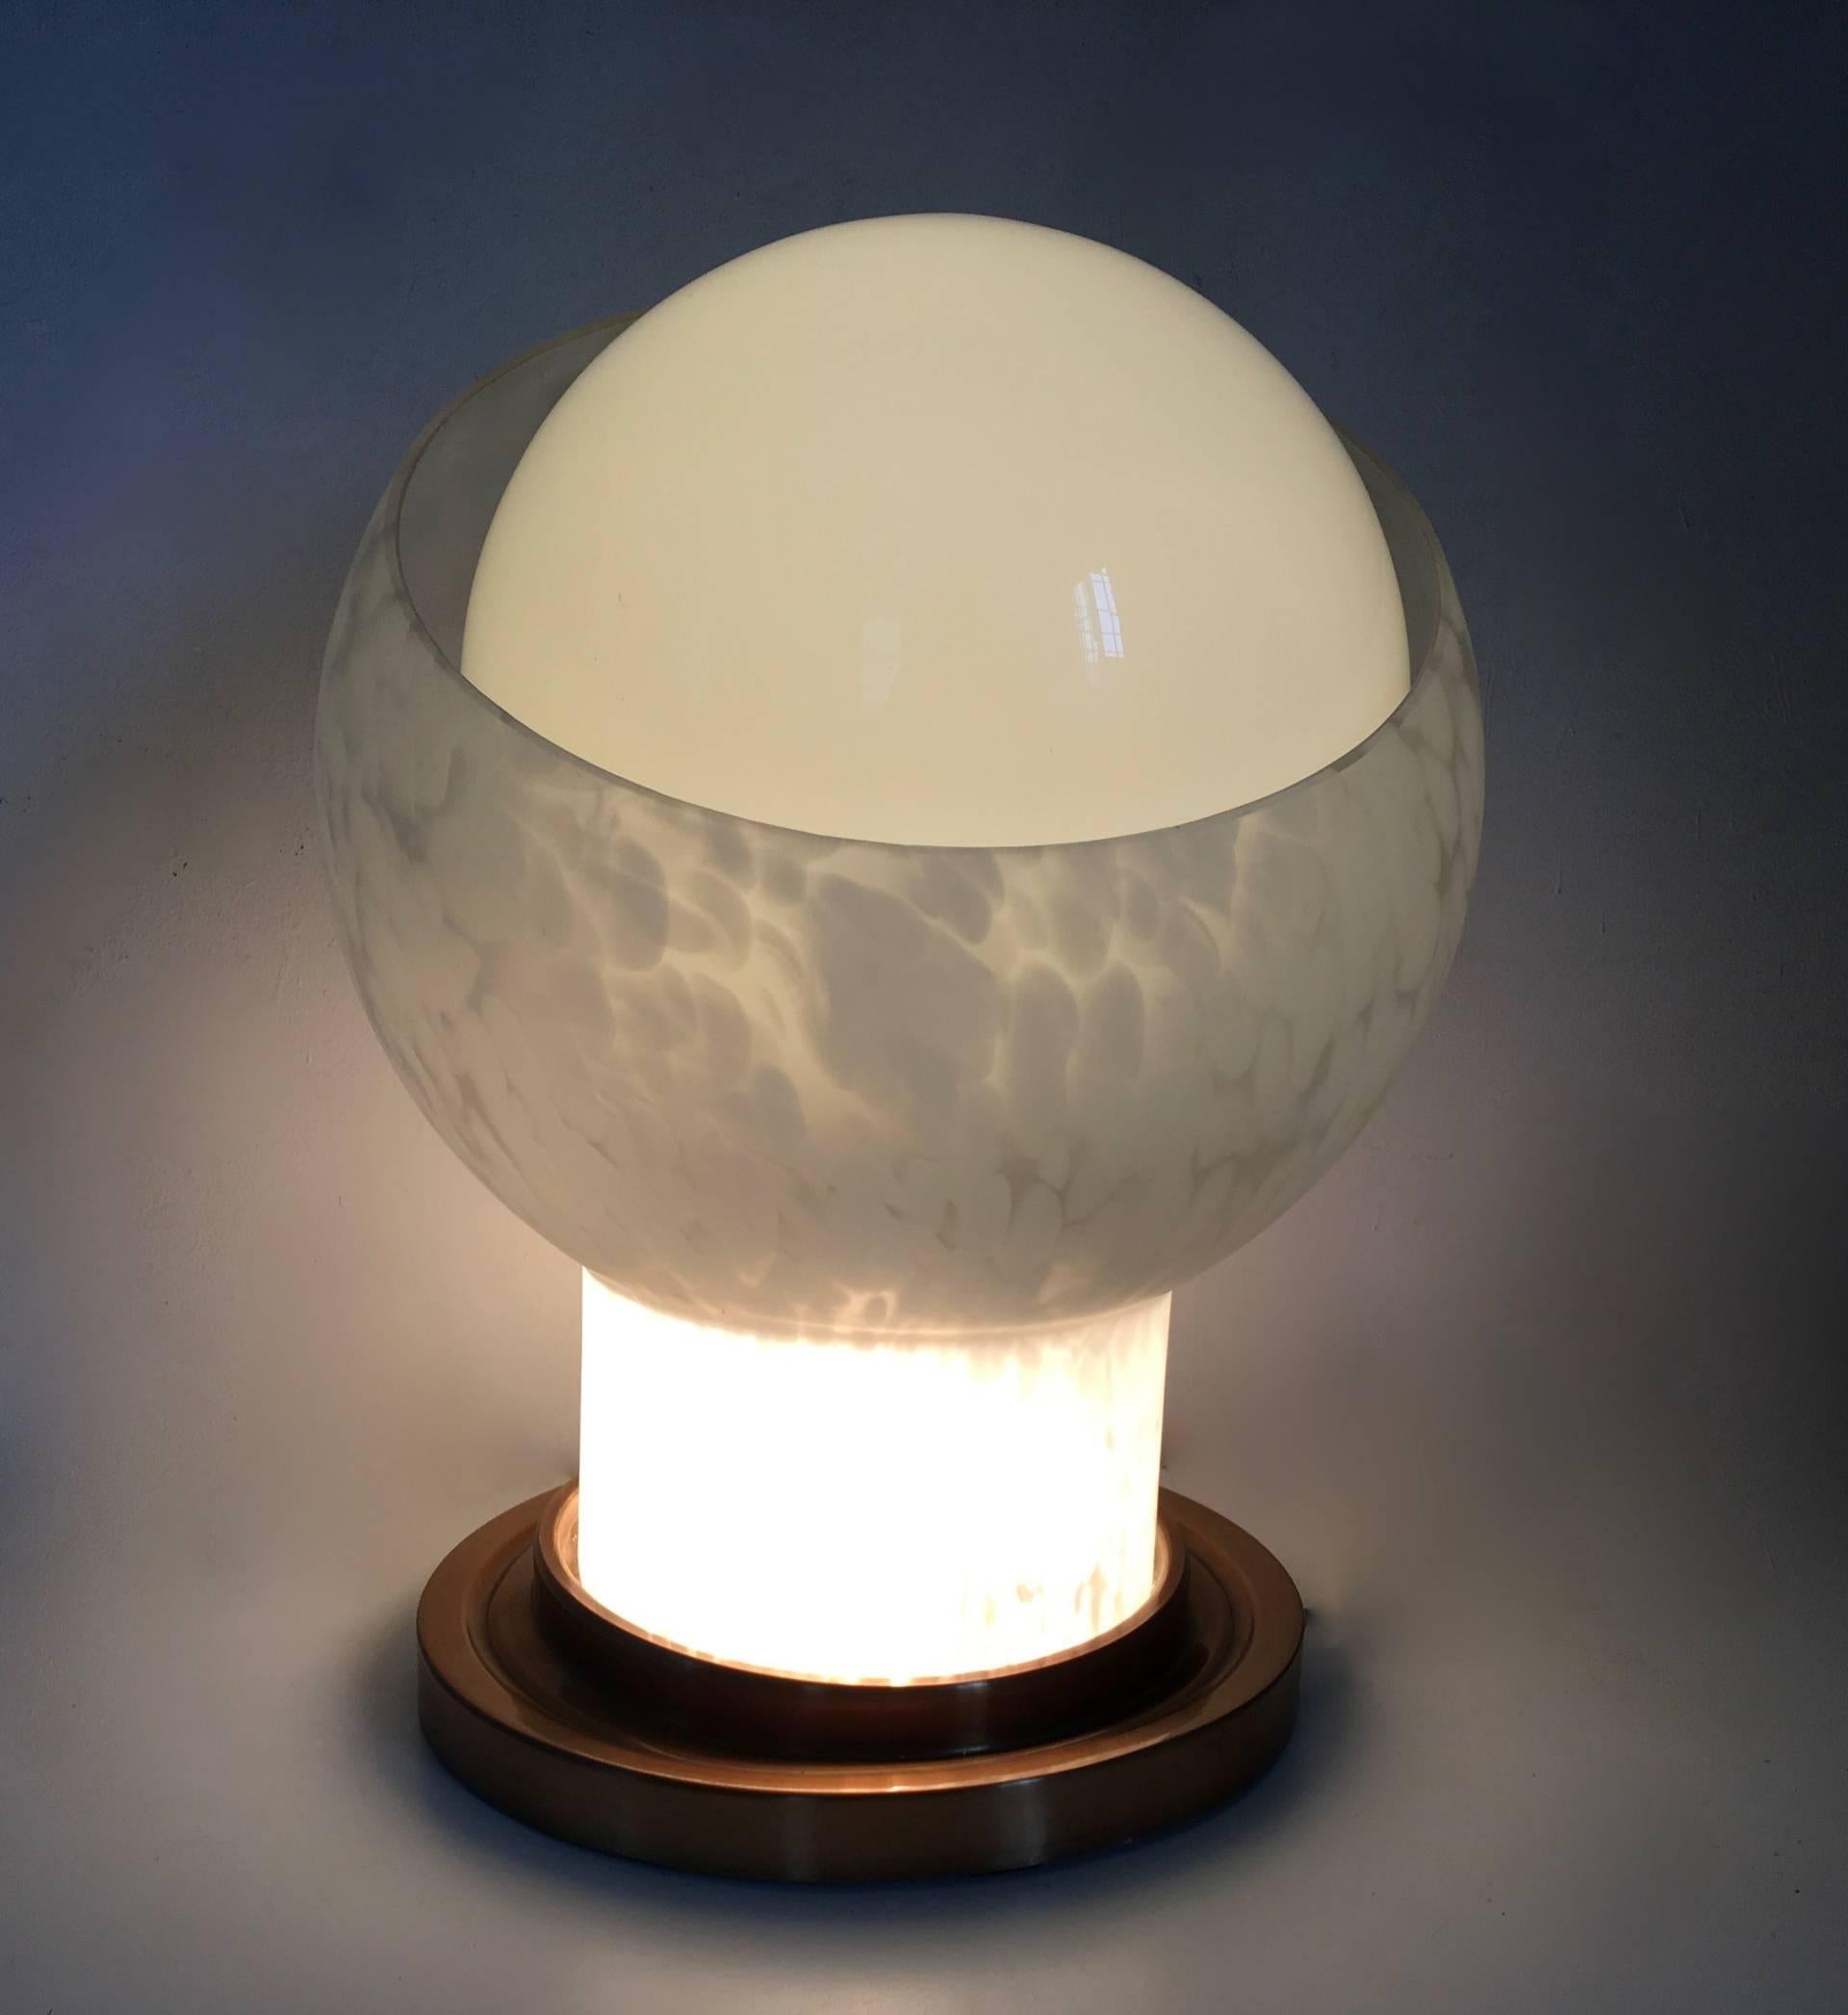 Made in Italy, 1970s. 
It features a spheric blown glass lampshade and a brass base.
It is a vintage piece, therefore it might show slight traces of use, but it can be considered as in perfect original condition

Measures: 
Diameter 38 cm 
Height 49